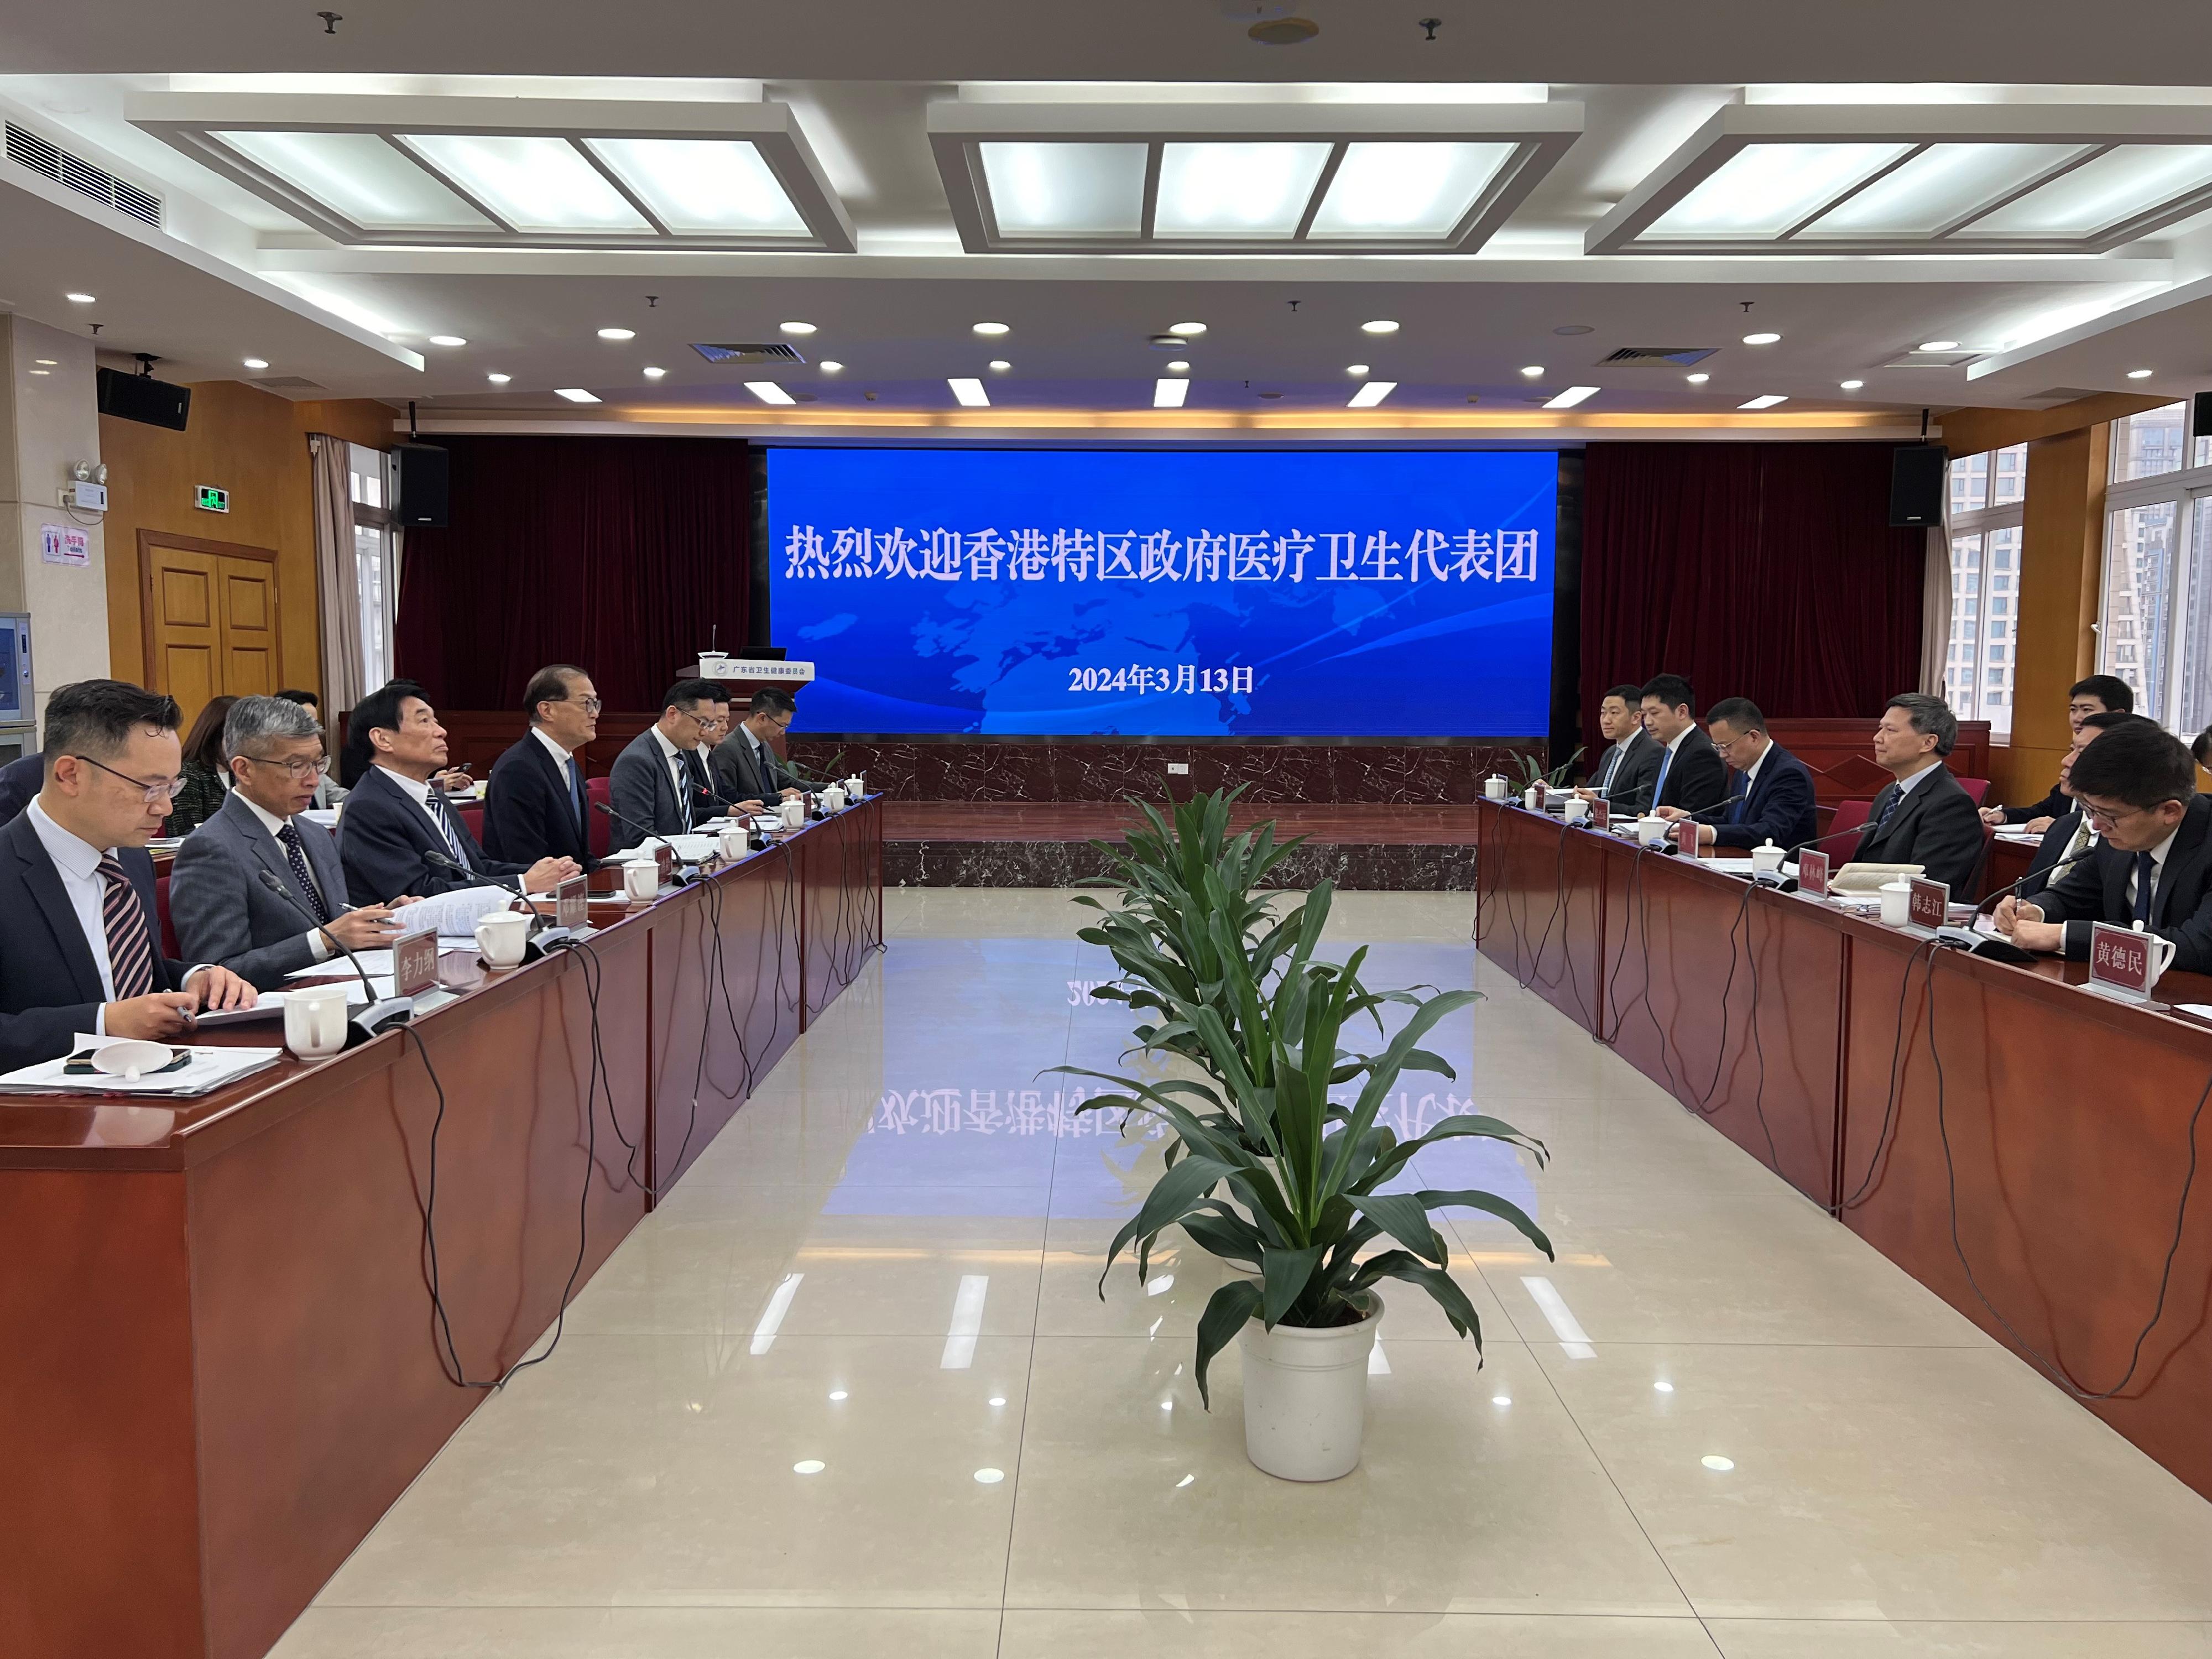 ​The Secretary for Health, Professor Lo Chung-mau (fourth left), and his delegation meet Deputy Director General of the Health Commission of Guangdong Province Mr Huang Fei (third right) in Guangzhou today (March 13) to discuss a number of cross-boundary healthcare services, with the Director of Health, Dr Ronald Lam (fifth left); the Controller of the Centre for Health Protection of the Department of Health, Dr Edwin Tsui (sixth left); Deputy Secretary for Health Mr Eddie Lee (first left); the Senior Advisor (Secretary for Health's Office), Dr Joe Fan (seventh left); the Chairman of the Hospital Authority (HA), Mr Henry Fan (third left); and the Deputising Chief Executive of the HA, Dr Simon Tang (second left), in attendance.